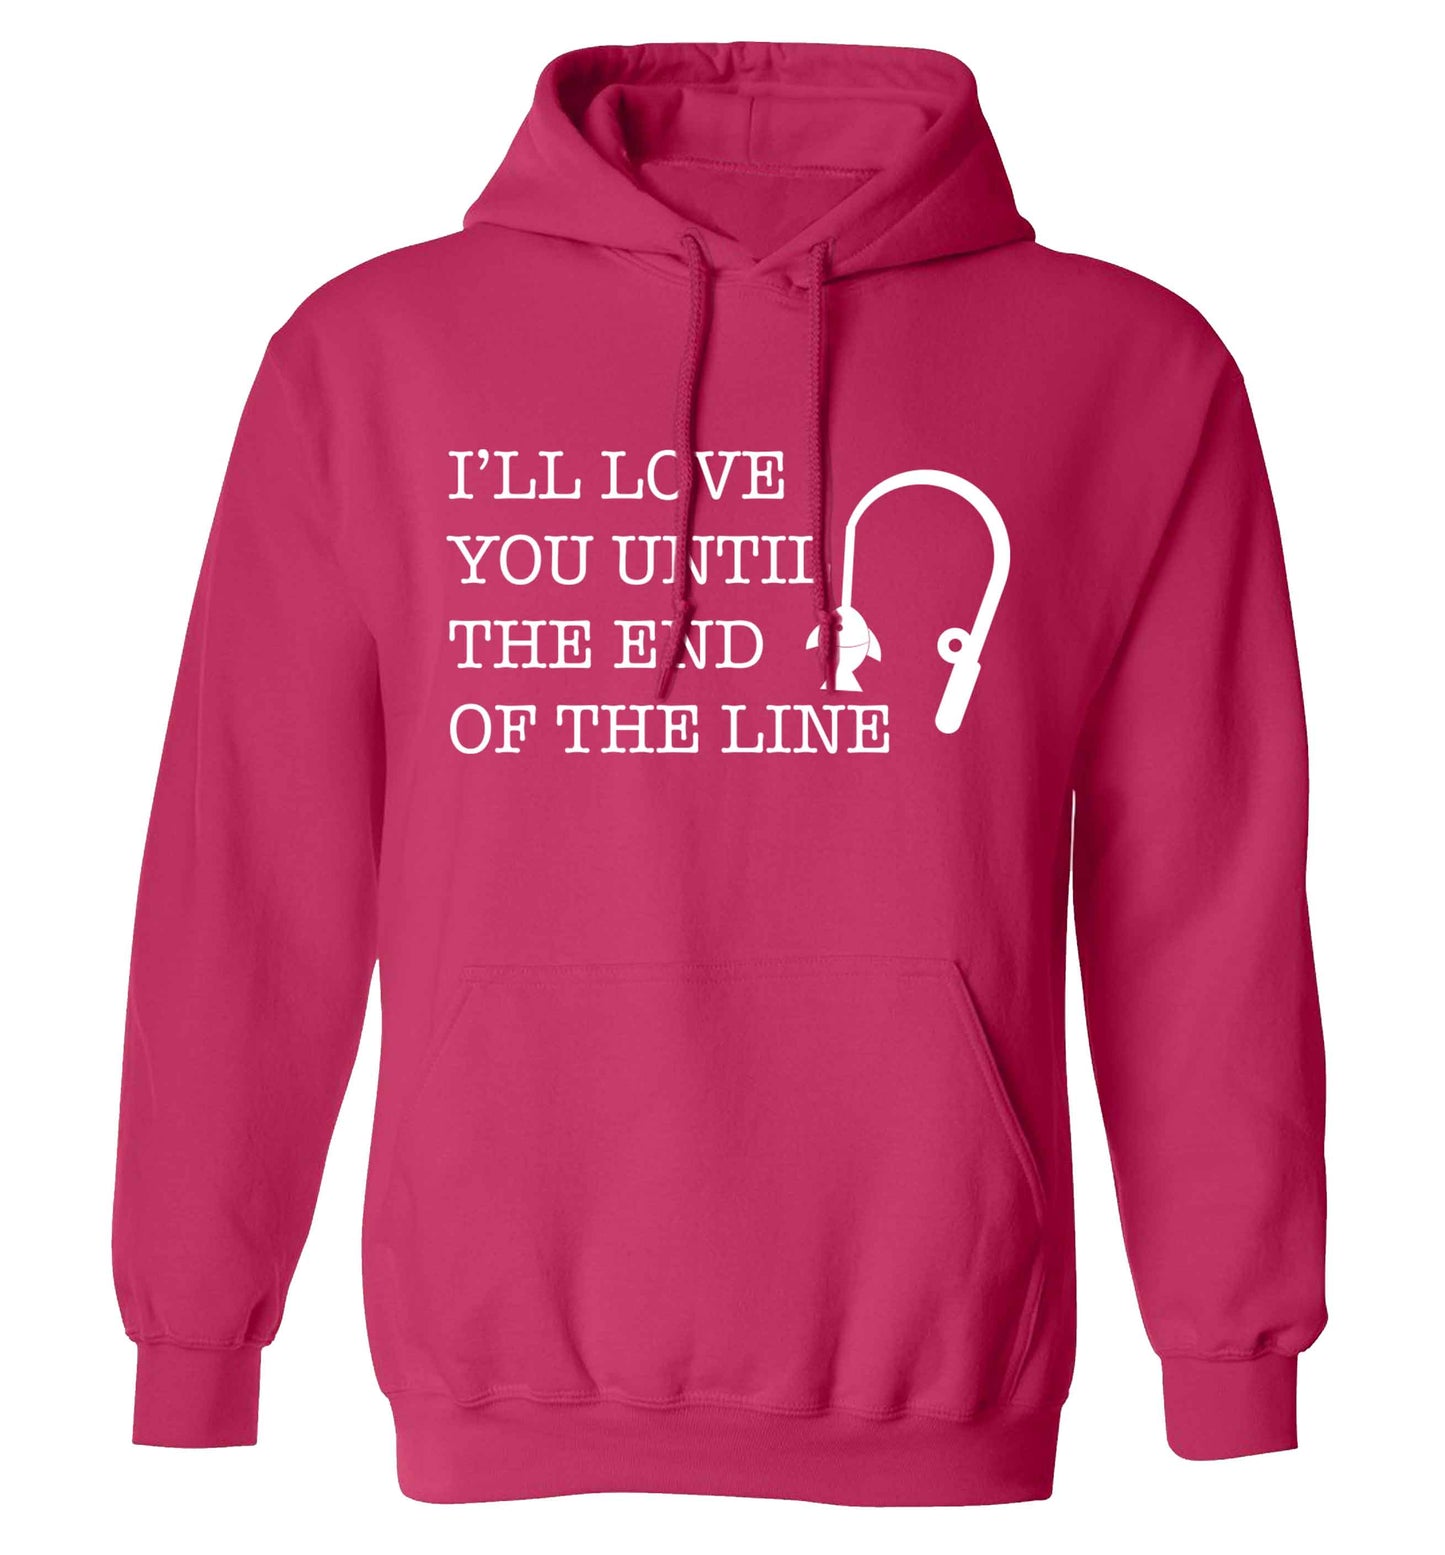 I'll love you until the end of the line adults unisex pink hoodie 2XL